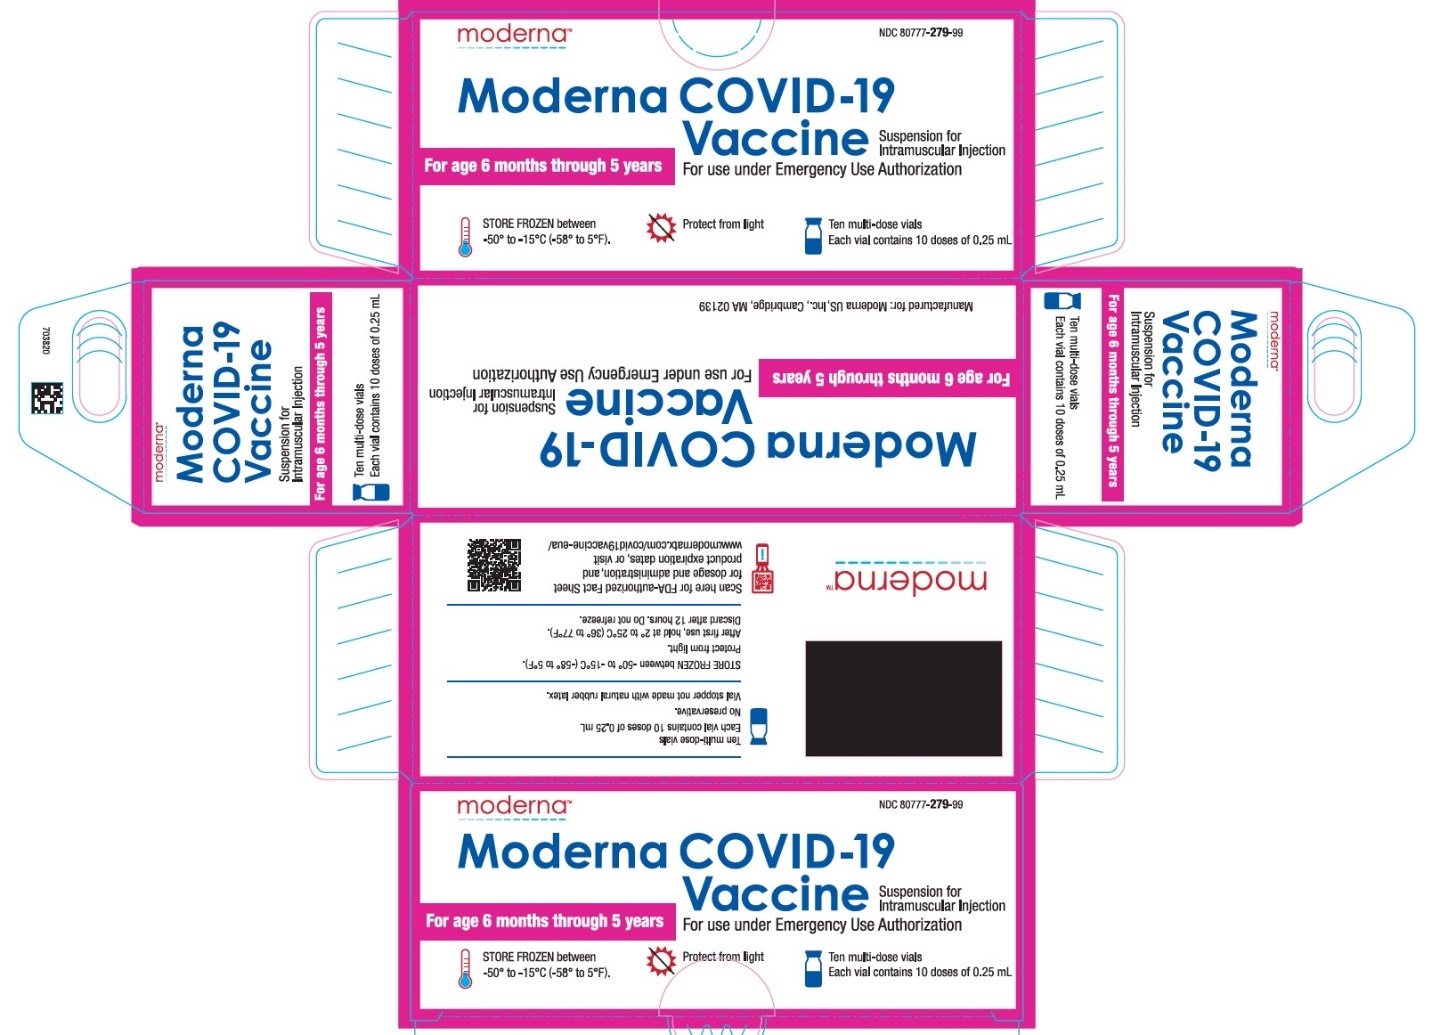 Moderna COVID-19 Vaccine Suspension for Intramuscular Injection for use under Emergency Use Authorization-Age 6mo through 5y Multi-Dose Vial (10 doses of 0.25 mL)